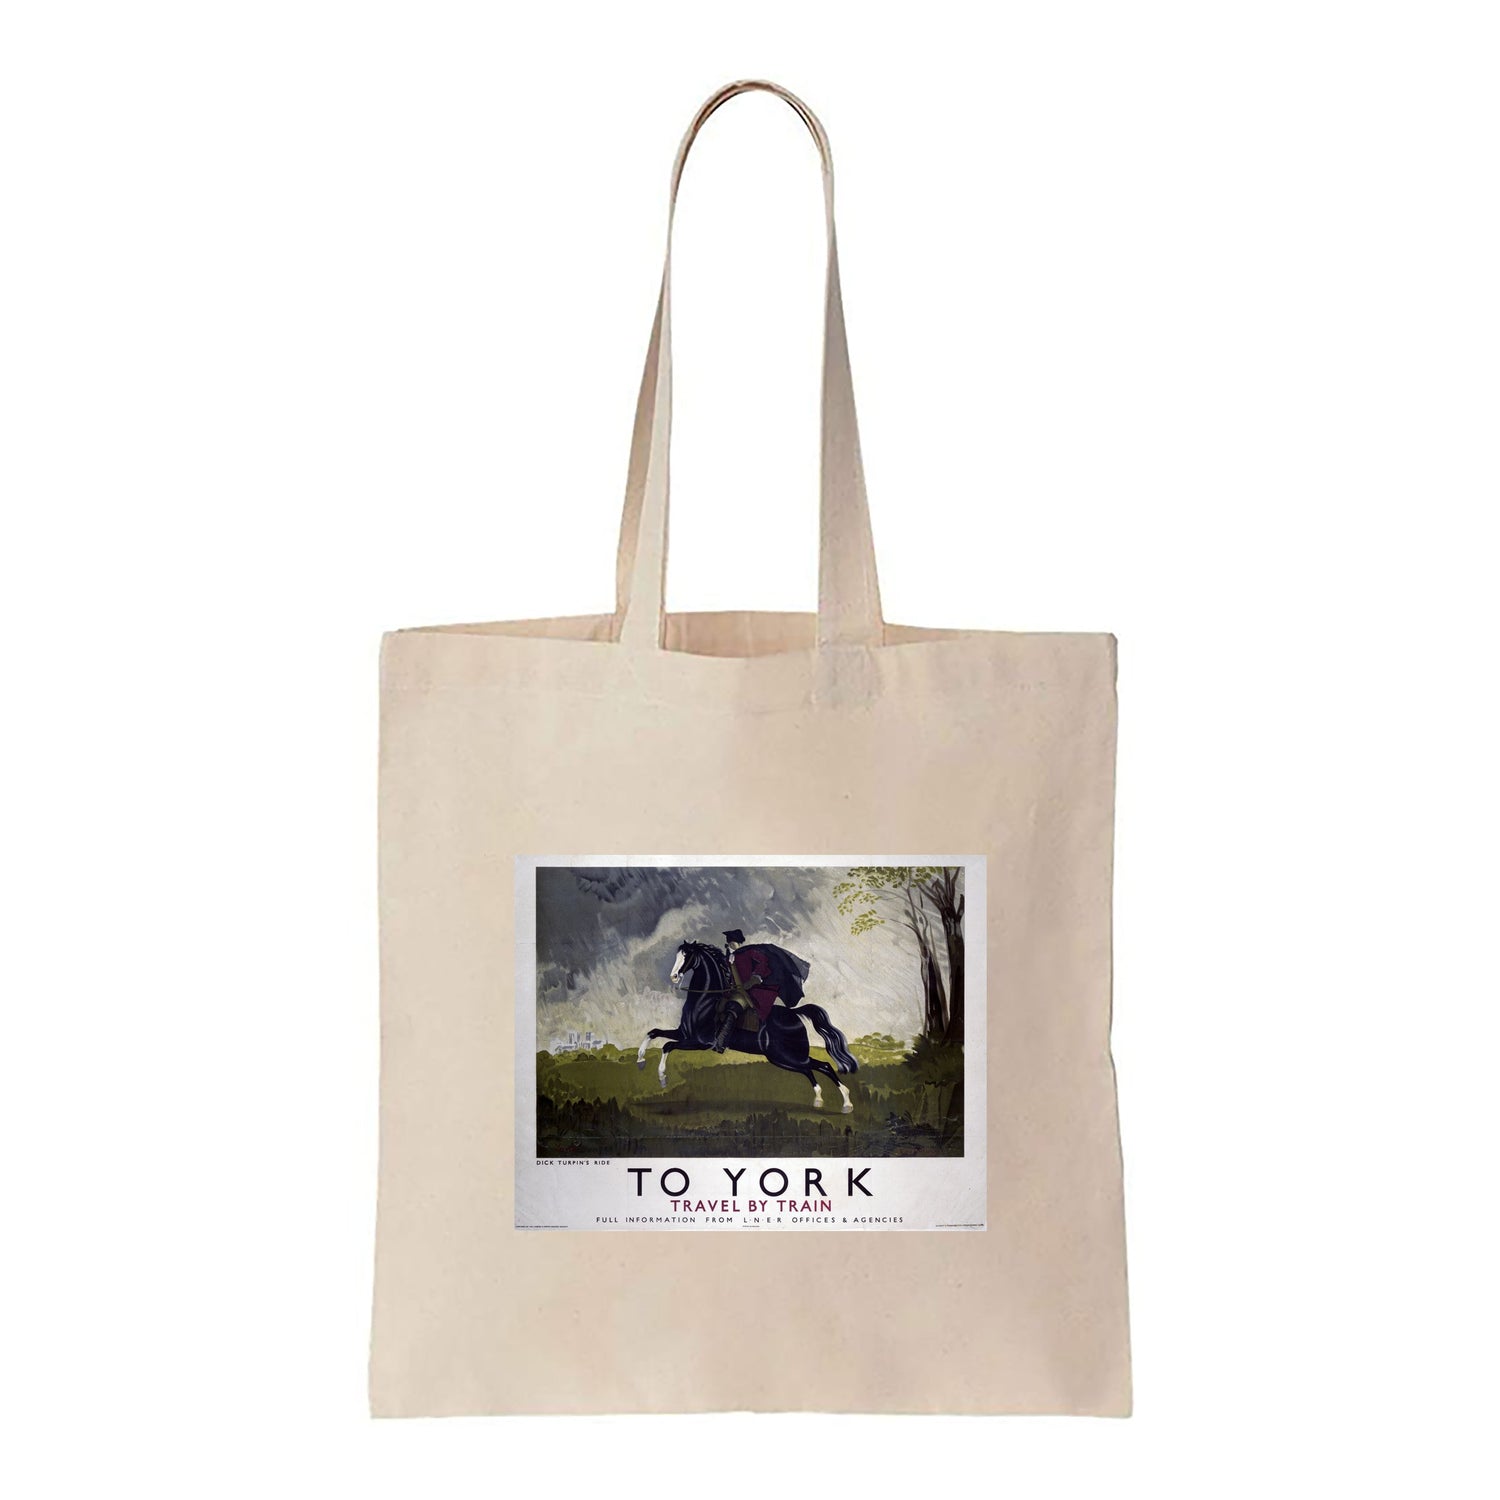 To York, Dick Turpin's Ride - Canvas Tote Bag